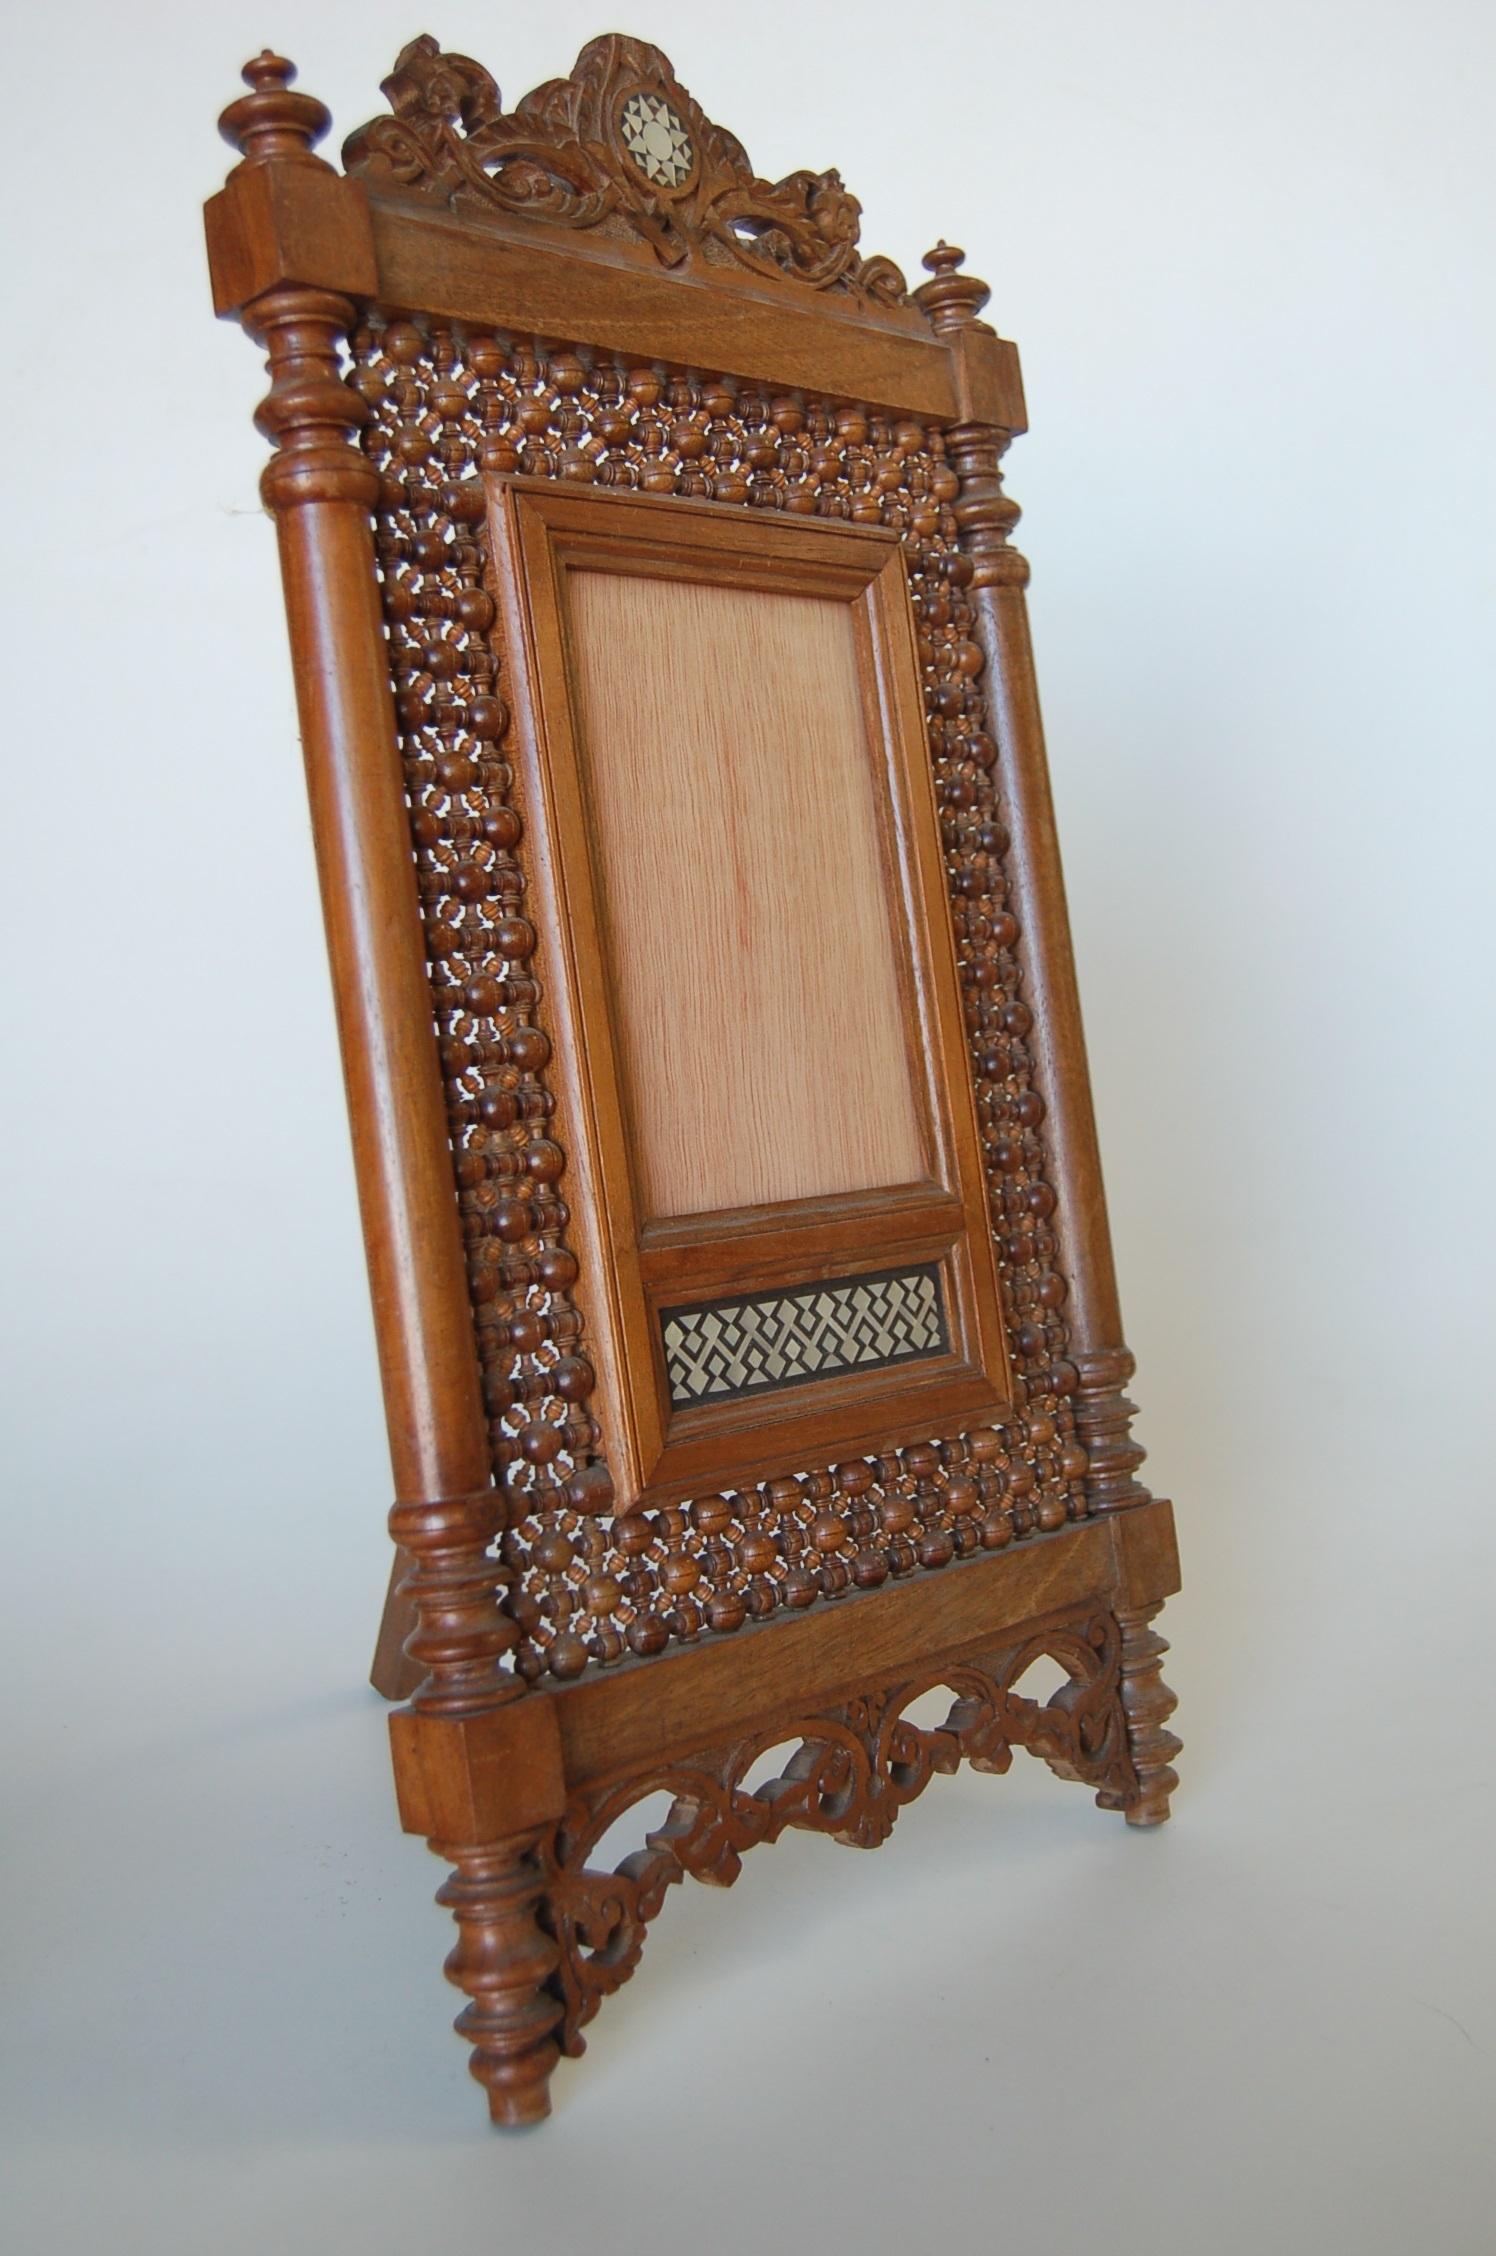 Intricate carved teak easeled table top mirror with mother of pearl.

A new high quality mirror will be added after purchase.

Measures: 18.5 high x 10